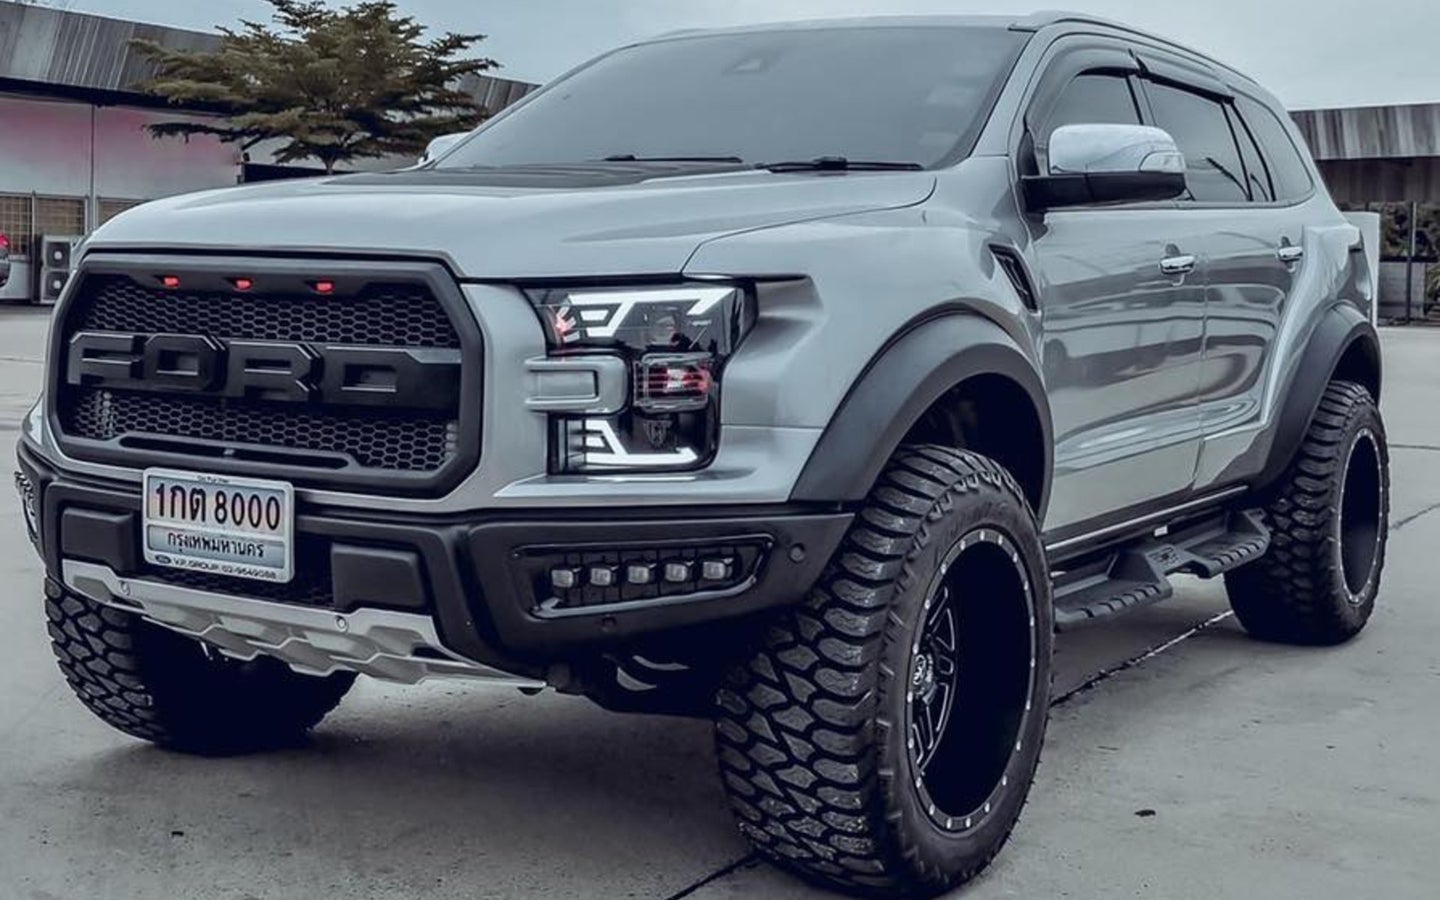 If Ford Made a Raptor SUV, It Would Look a Lot Like This Beast